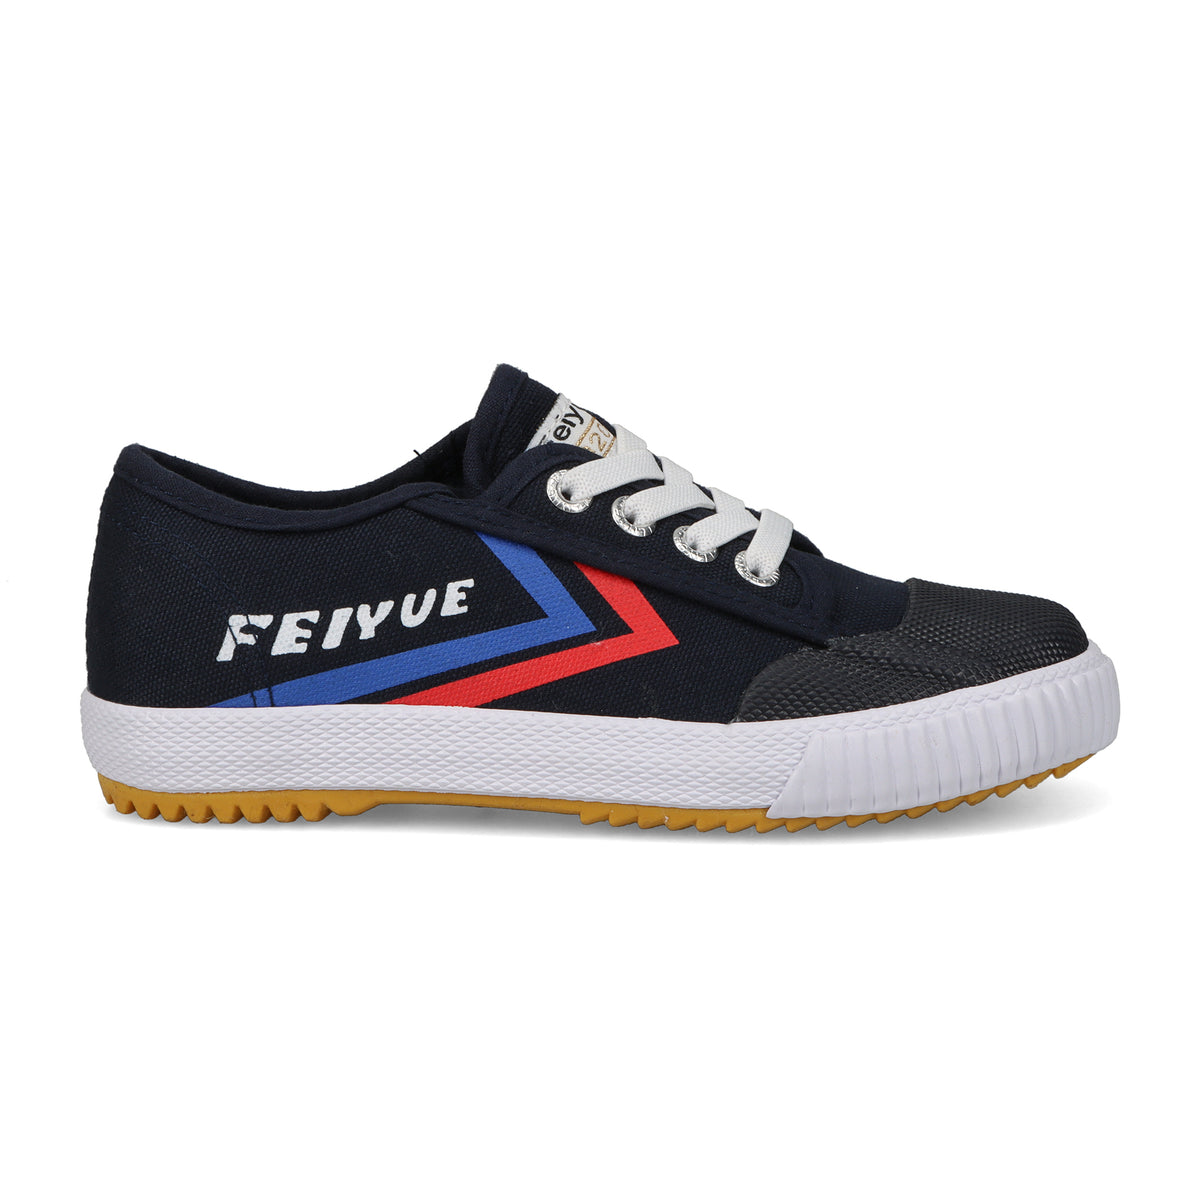 Feiyue Trainers Review